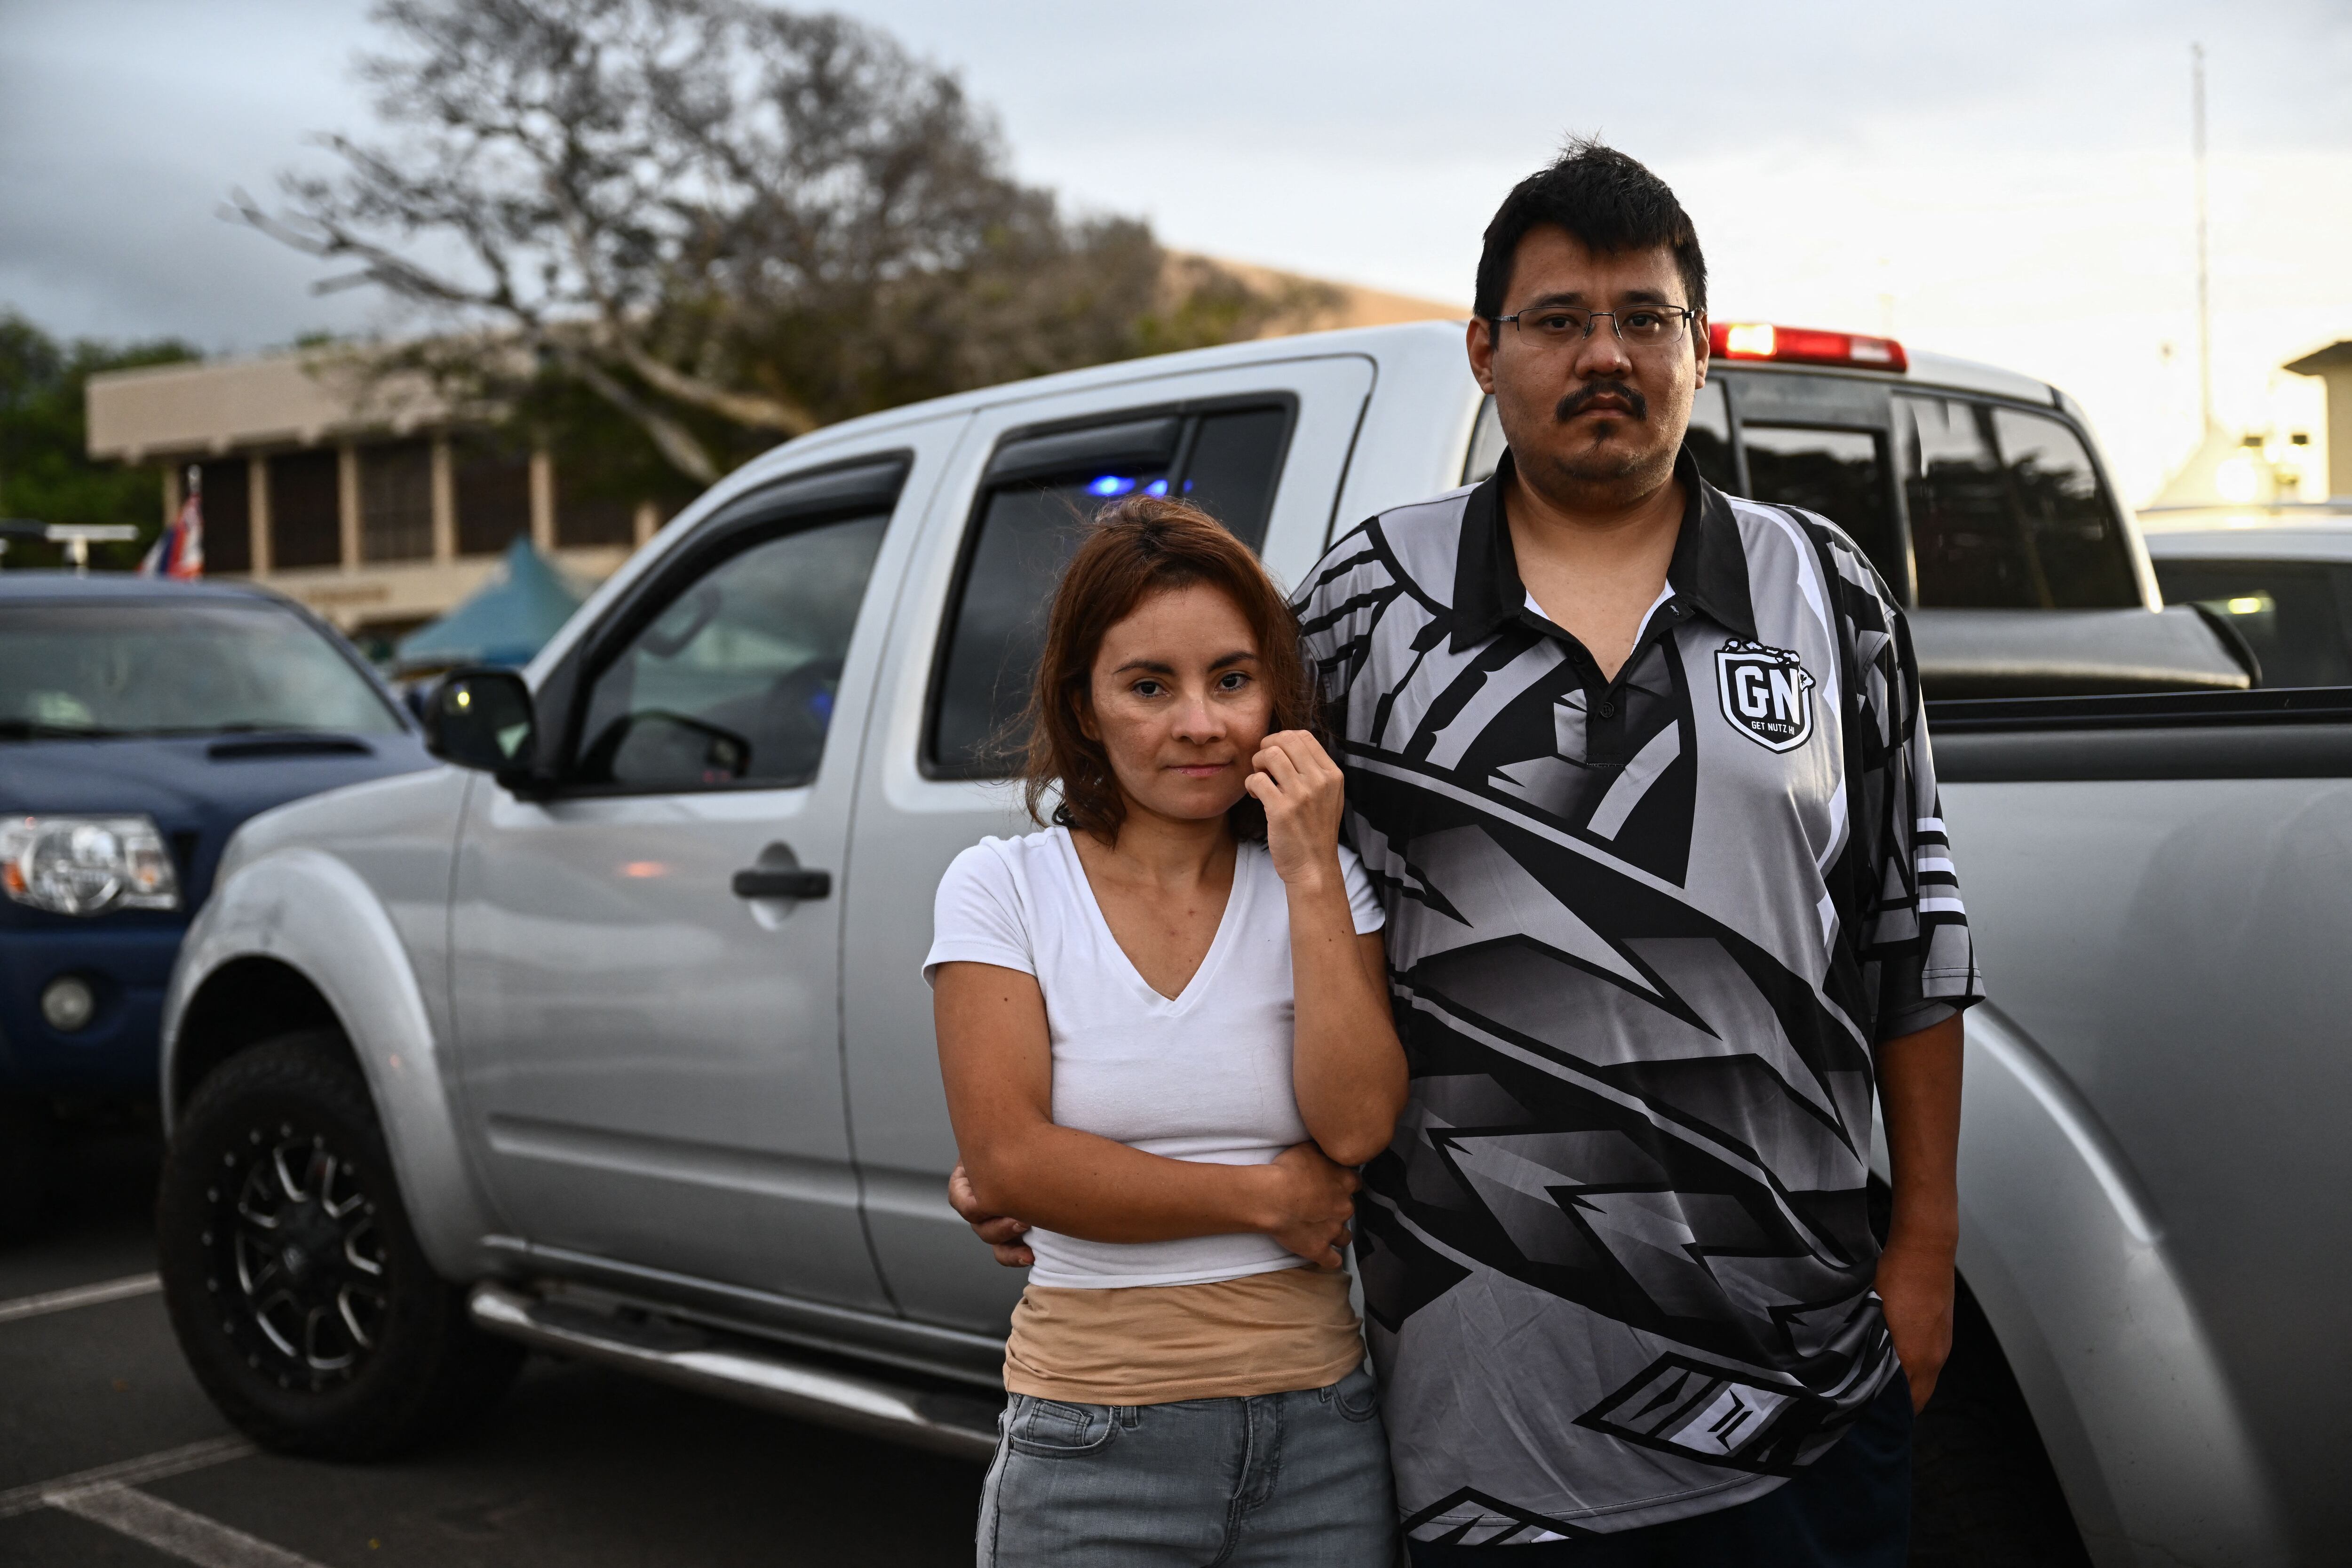 Jose Victoria (R) and his wife Jennifer Herrera (L) pose for a portrait outside a shelter at War Memorial Stadium after fleeing their home near Lahaina after the West Maui wildfires in Wailuku, Hawaii.  (Photo by Patrick T. Fallon / AFP)